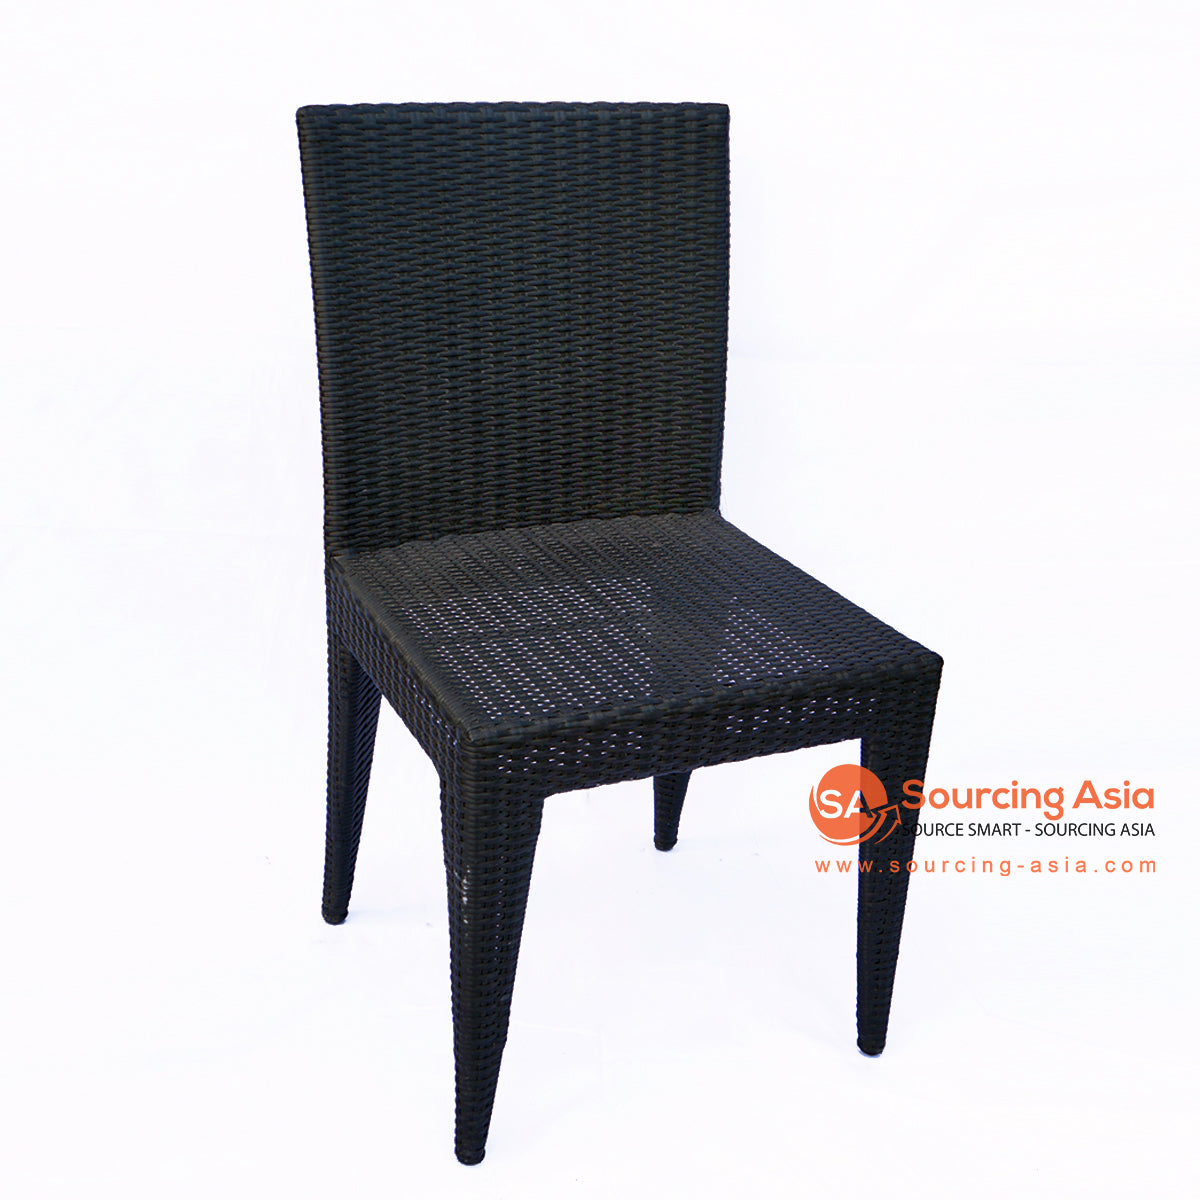 BNTC001-6 BLACK SYNTHETIC RATTAN DINING CHAIR